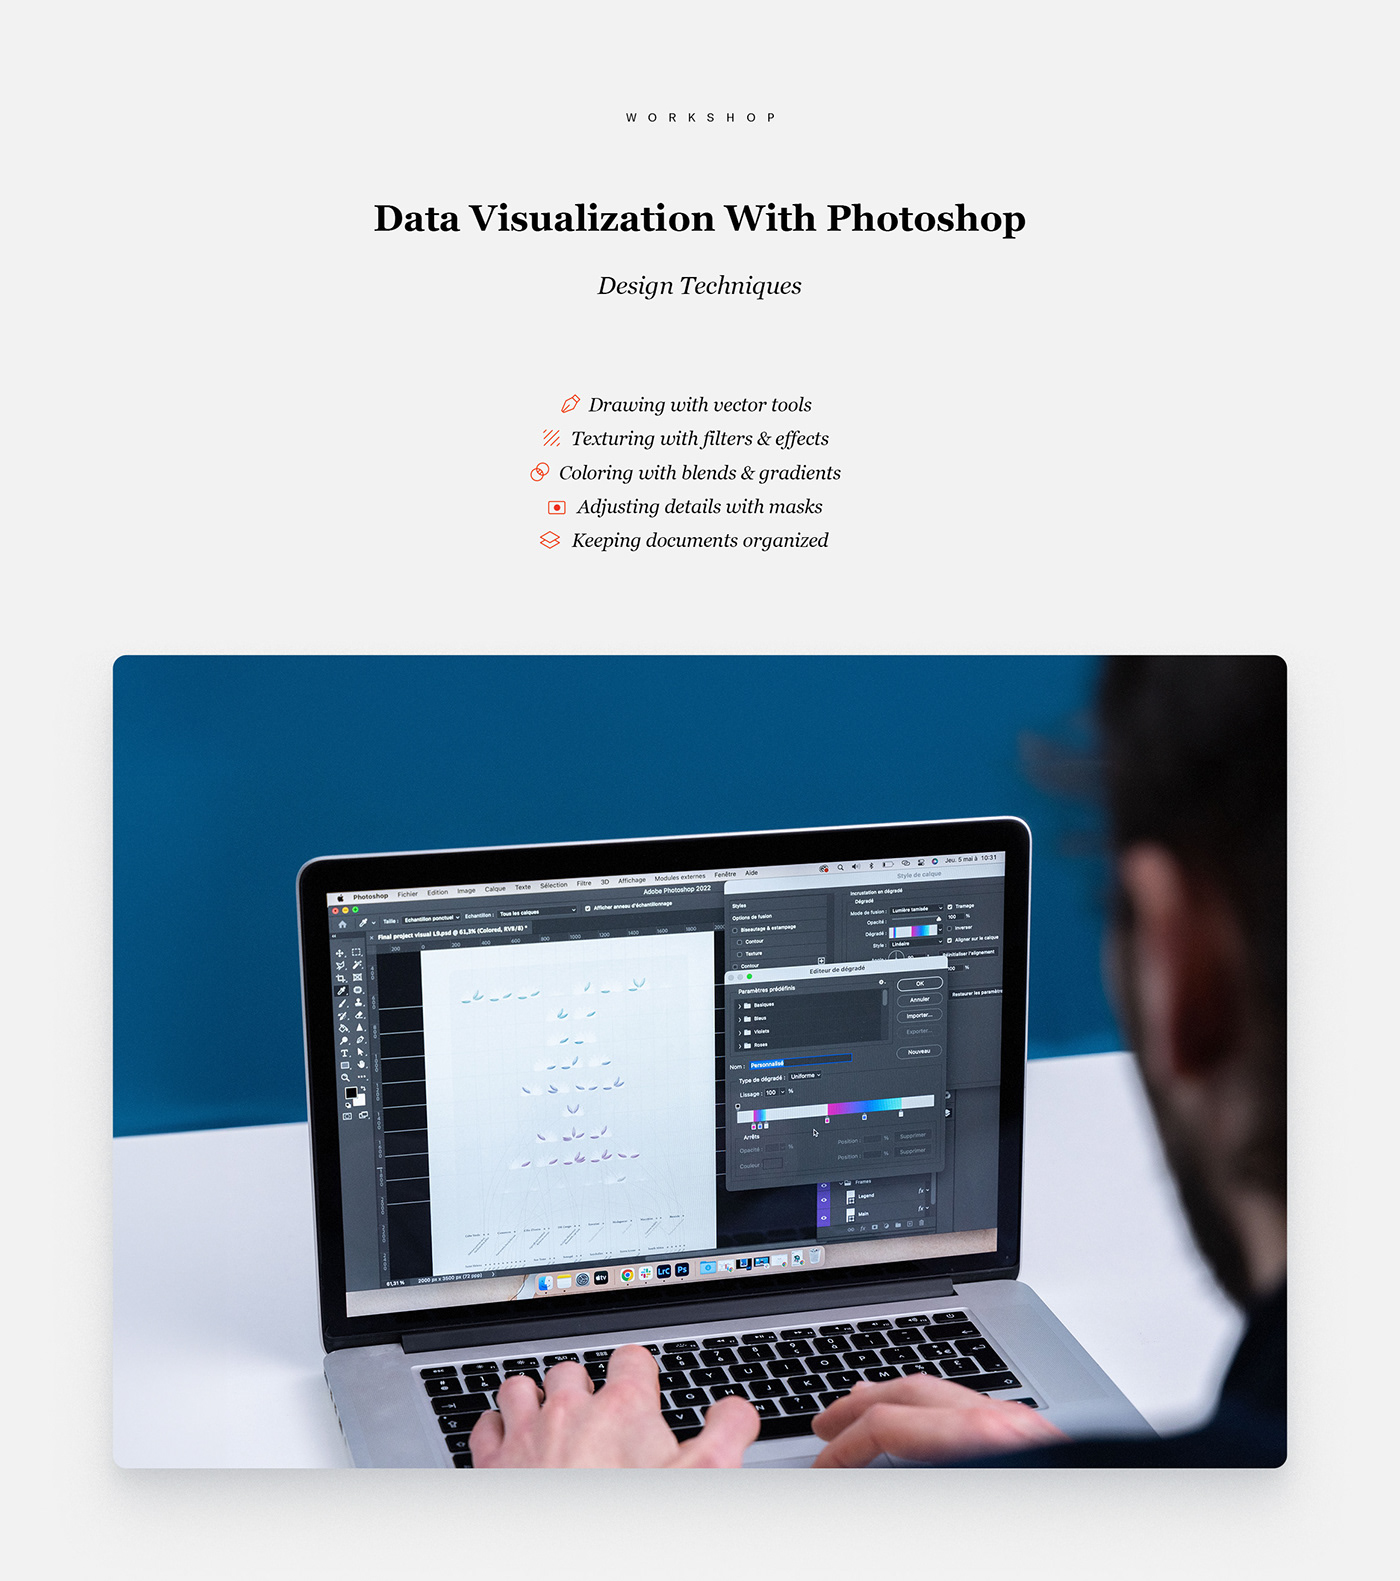 Promotional poster for my Domestika workshop: Data Visualization With Photoshop